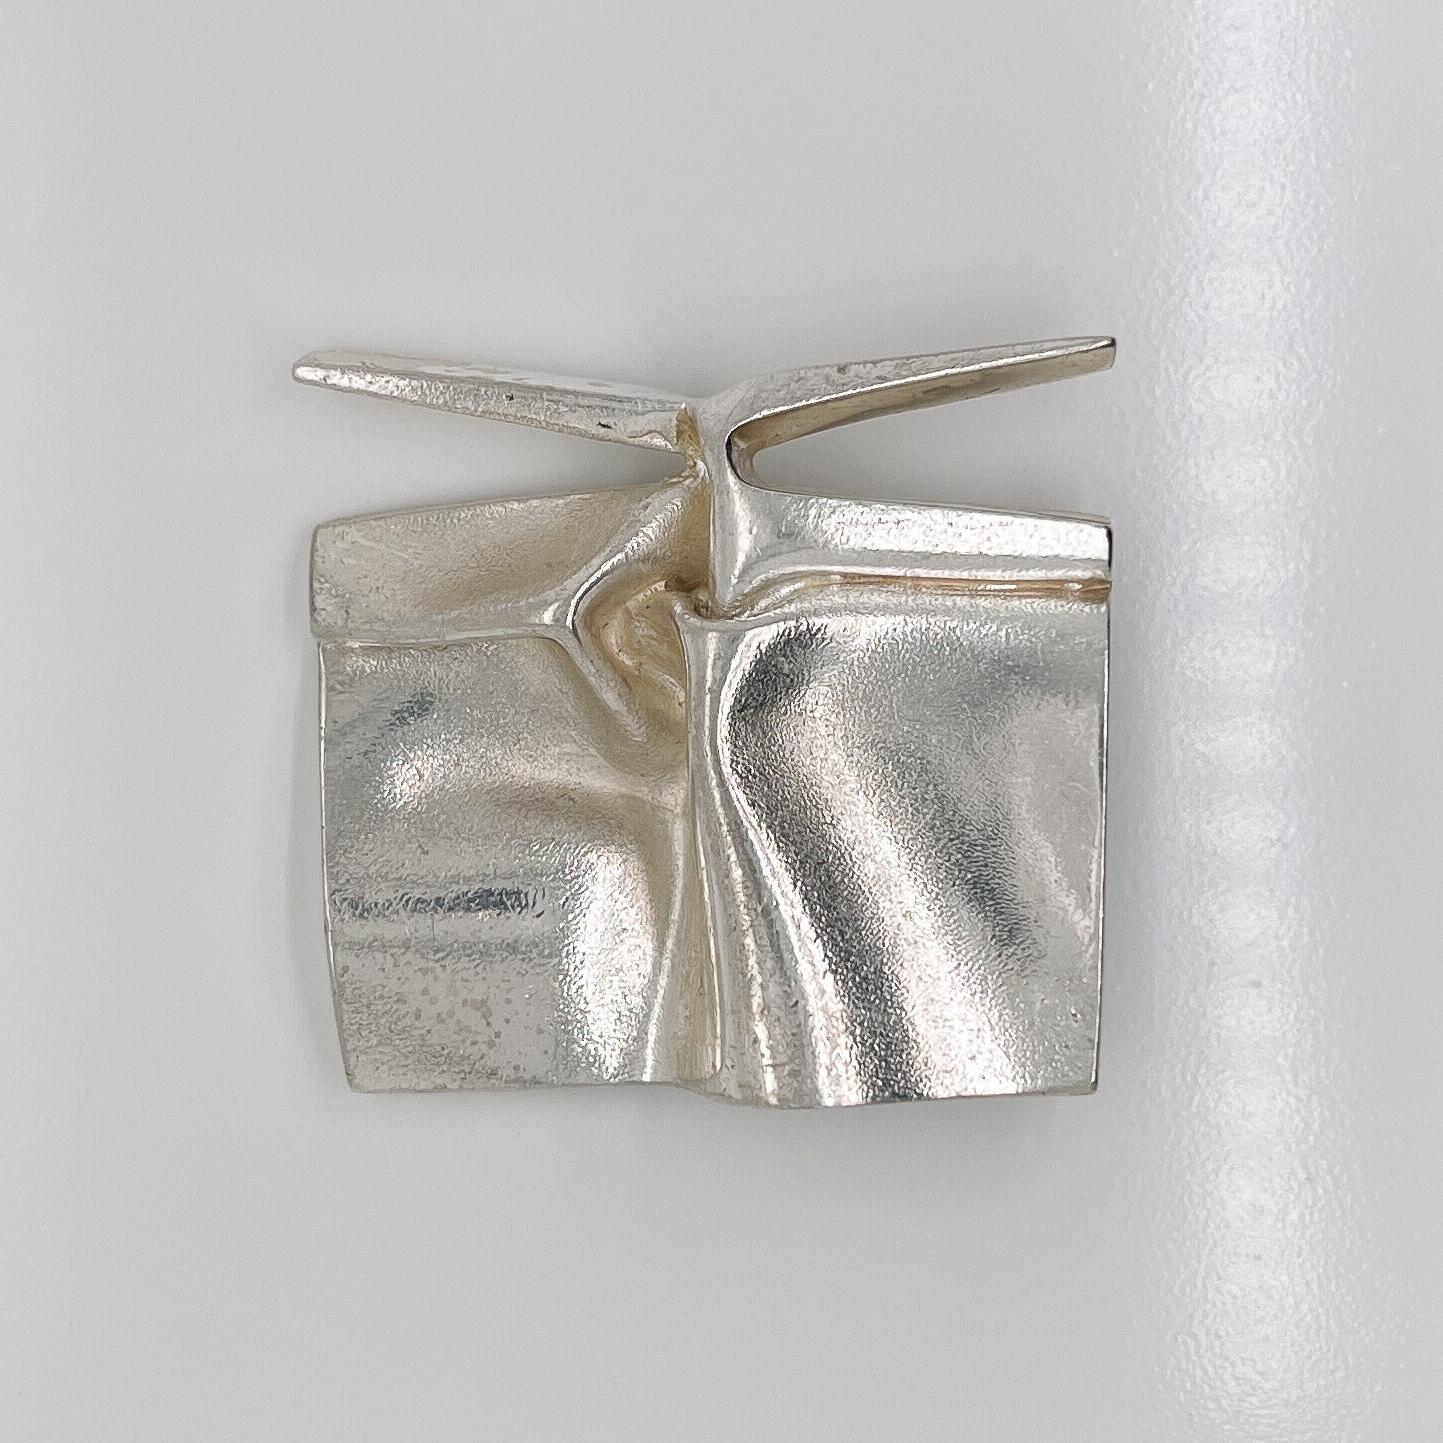 A very fine Finnish modernist sterling silver brooch or pendant. 

By Björn Weckstrom for Lapponia.

Fashioned in cast silver to look and feel like folded metal or fabric.

Worn as a brooch or pin (and also with two integral bails on the reverse to